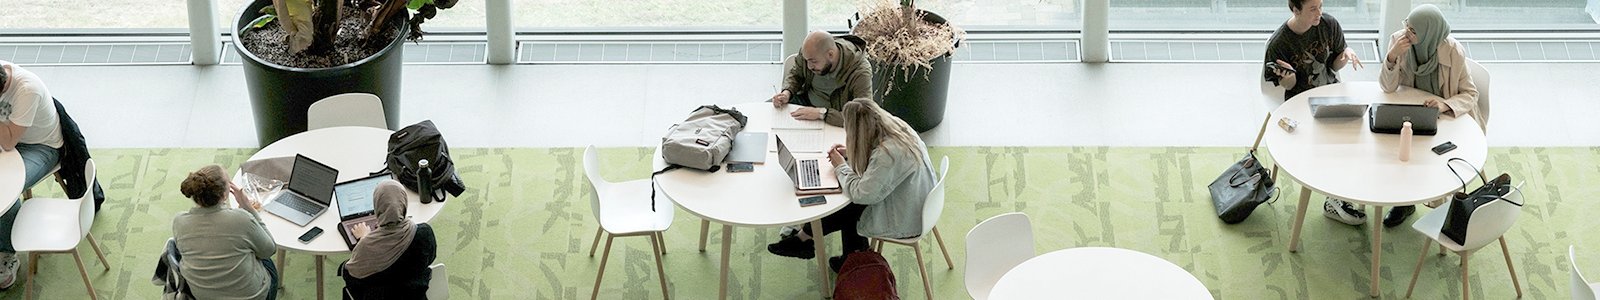 Students working in a building of Faculty of Science